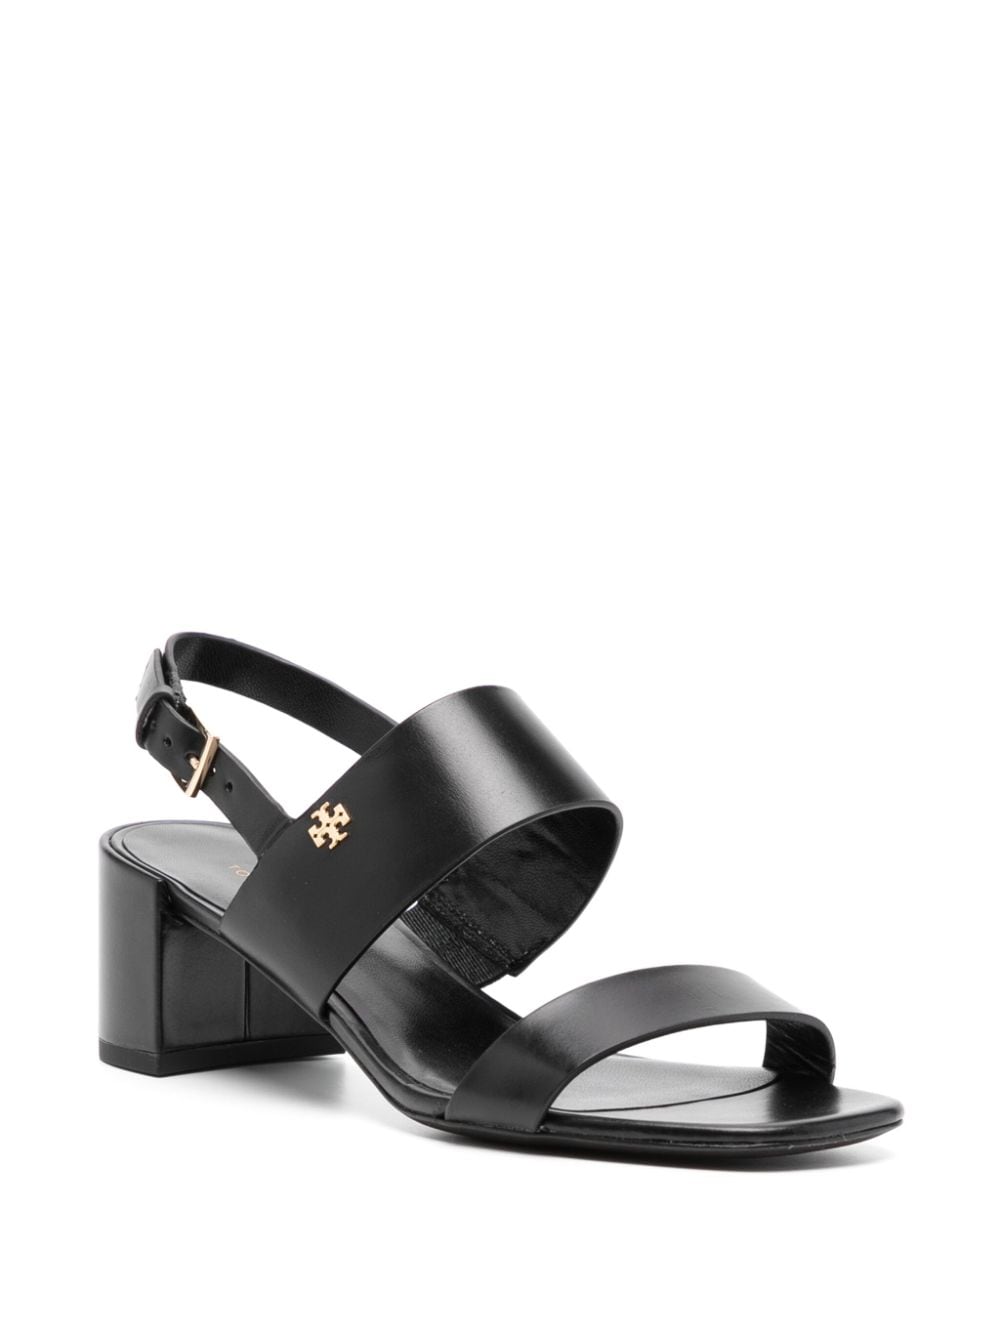 DOUBLE T 50MM LEATHER SANDALS